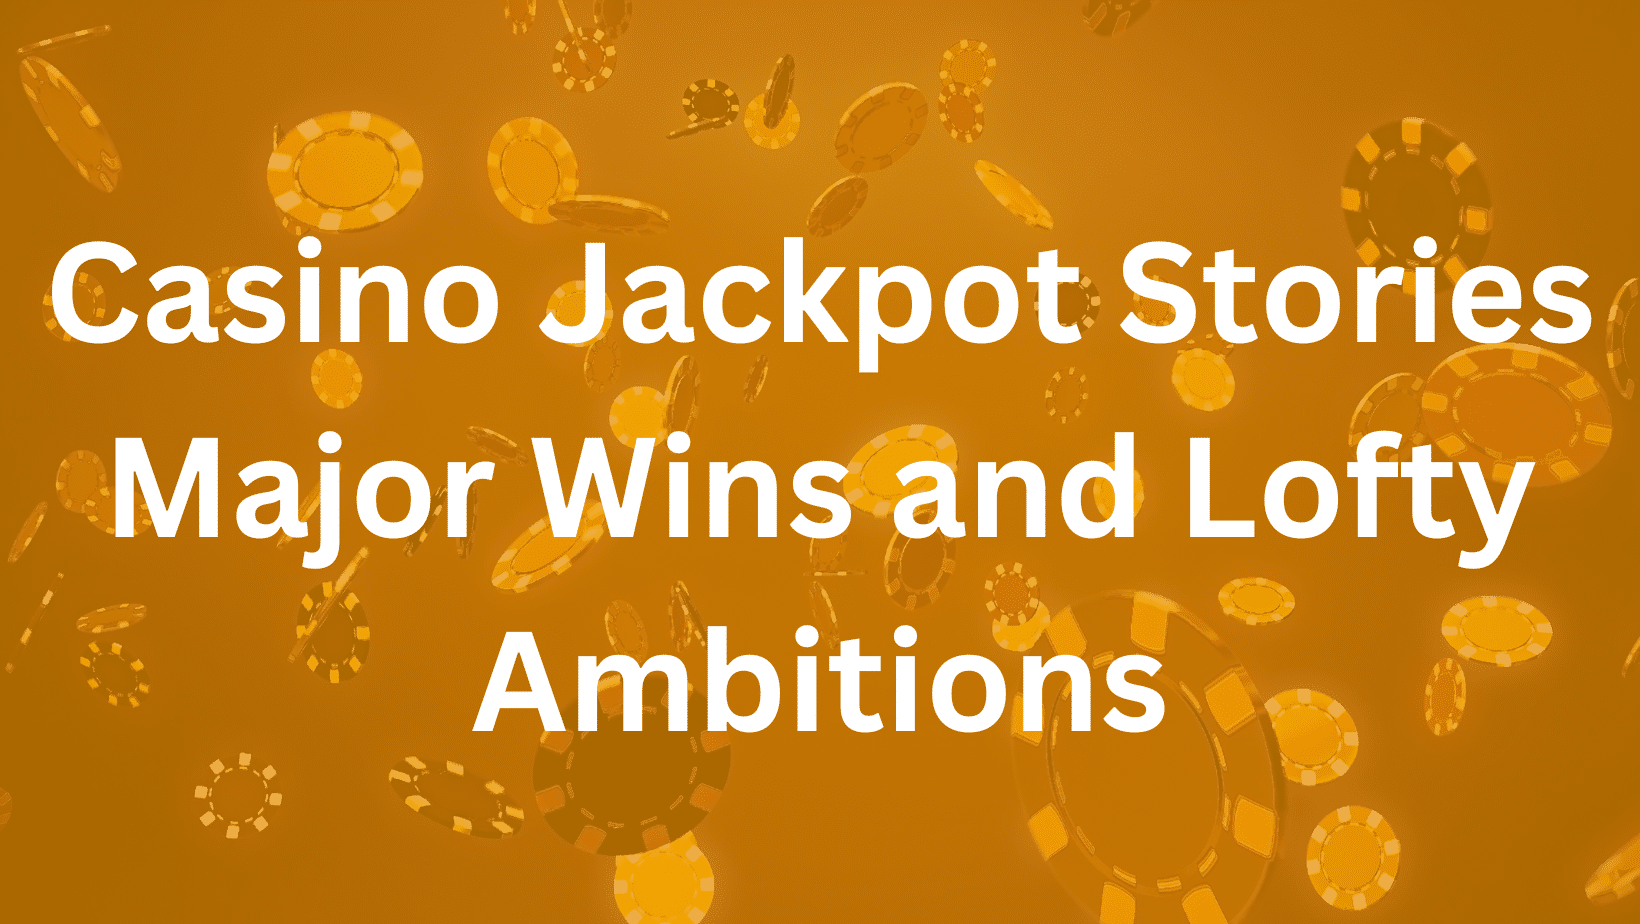 Casino Jackpot Stories Major Wins and Lofty Ambitions